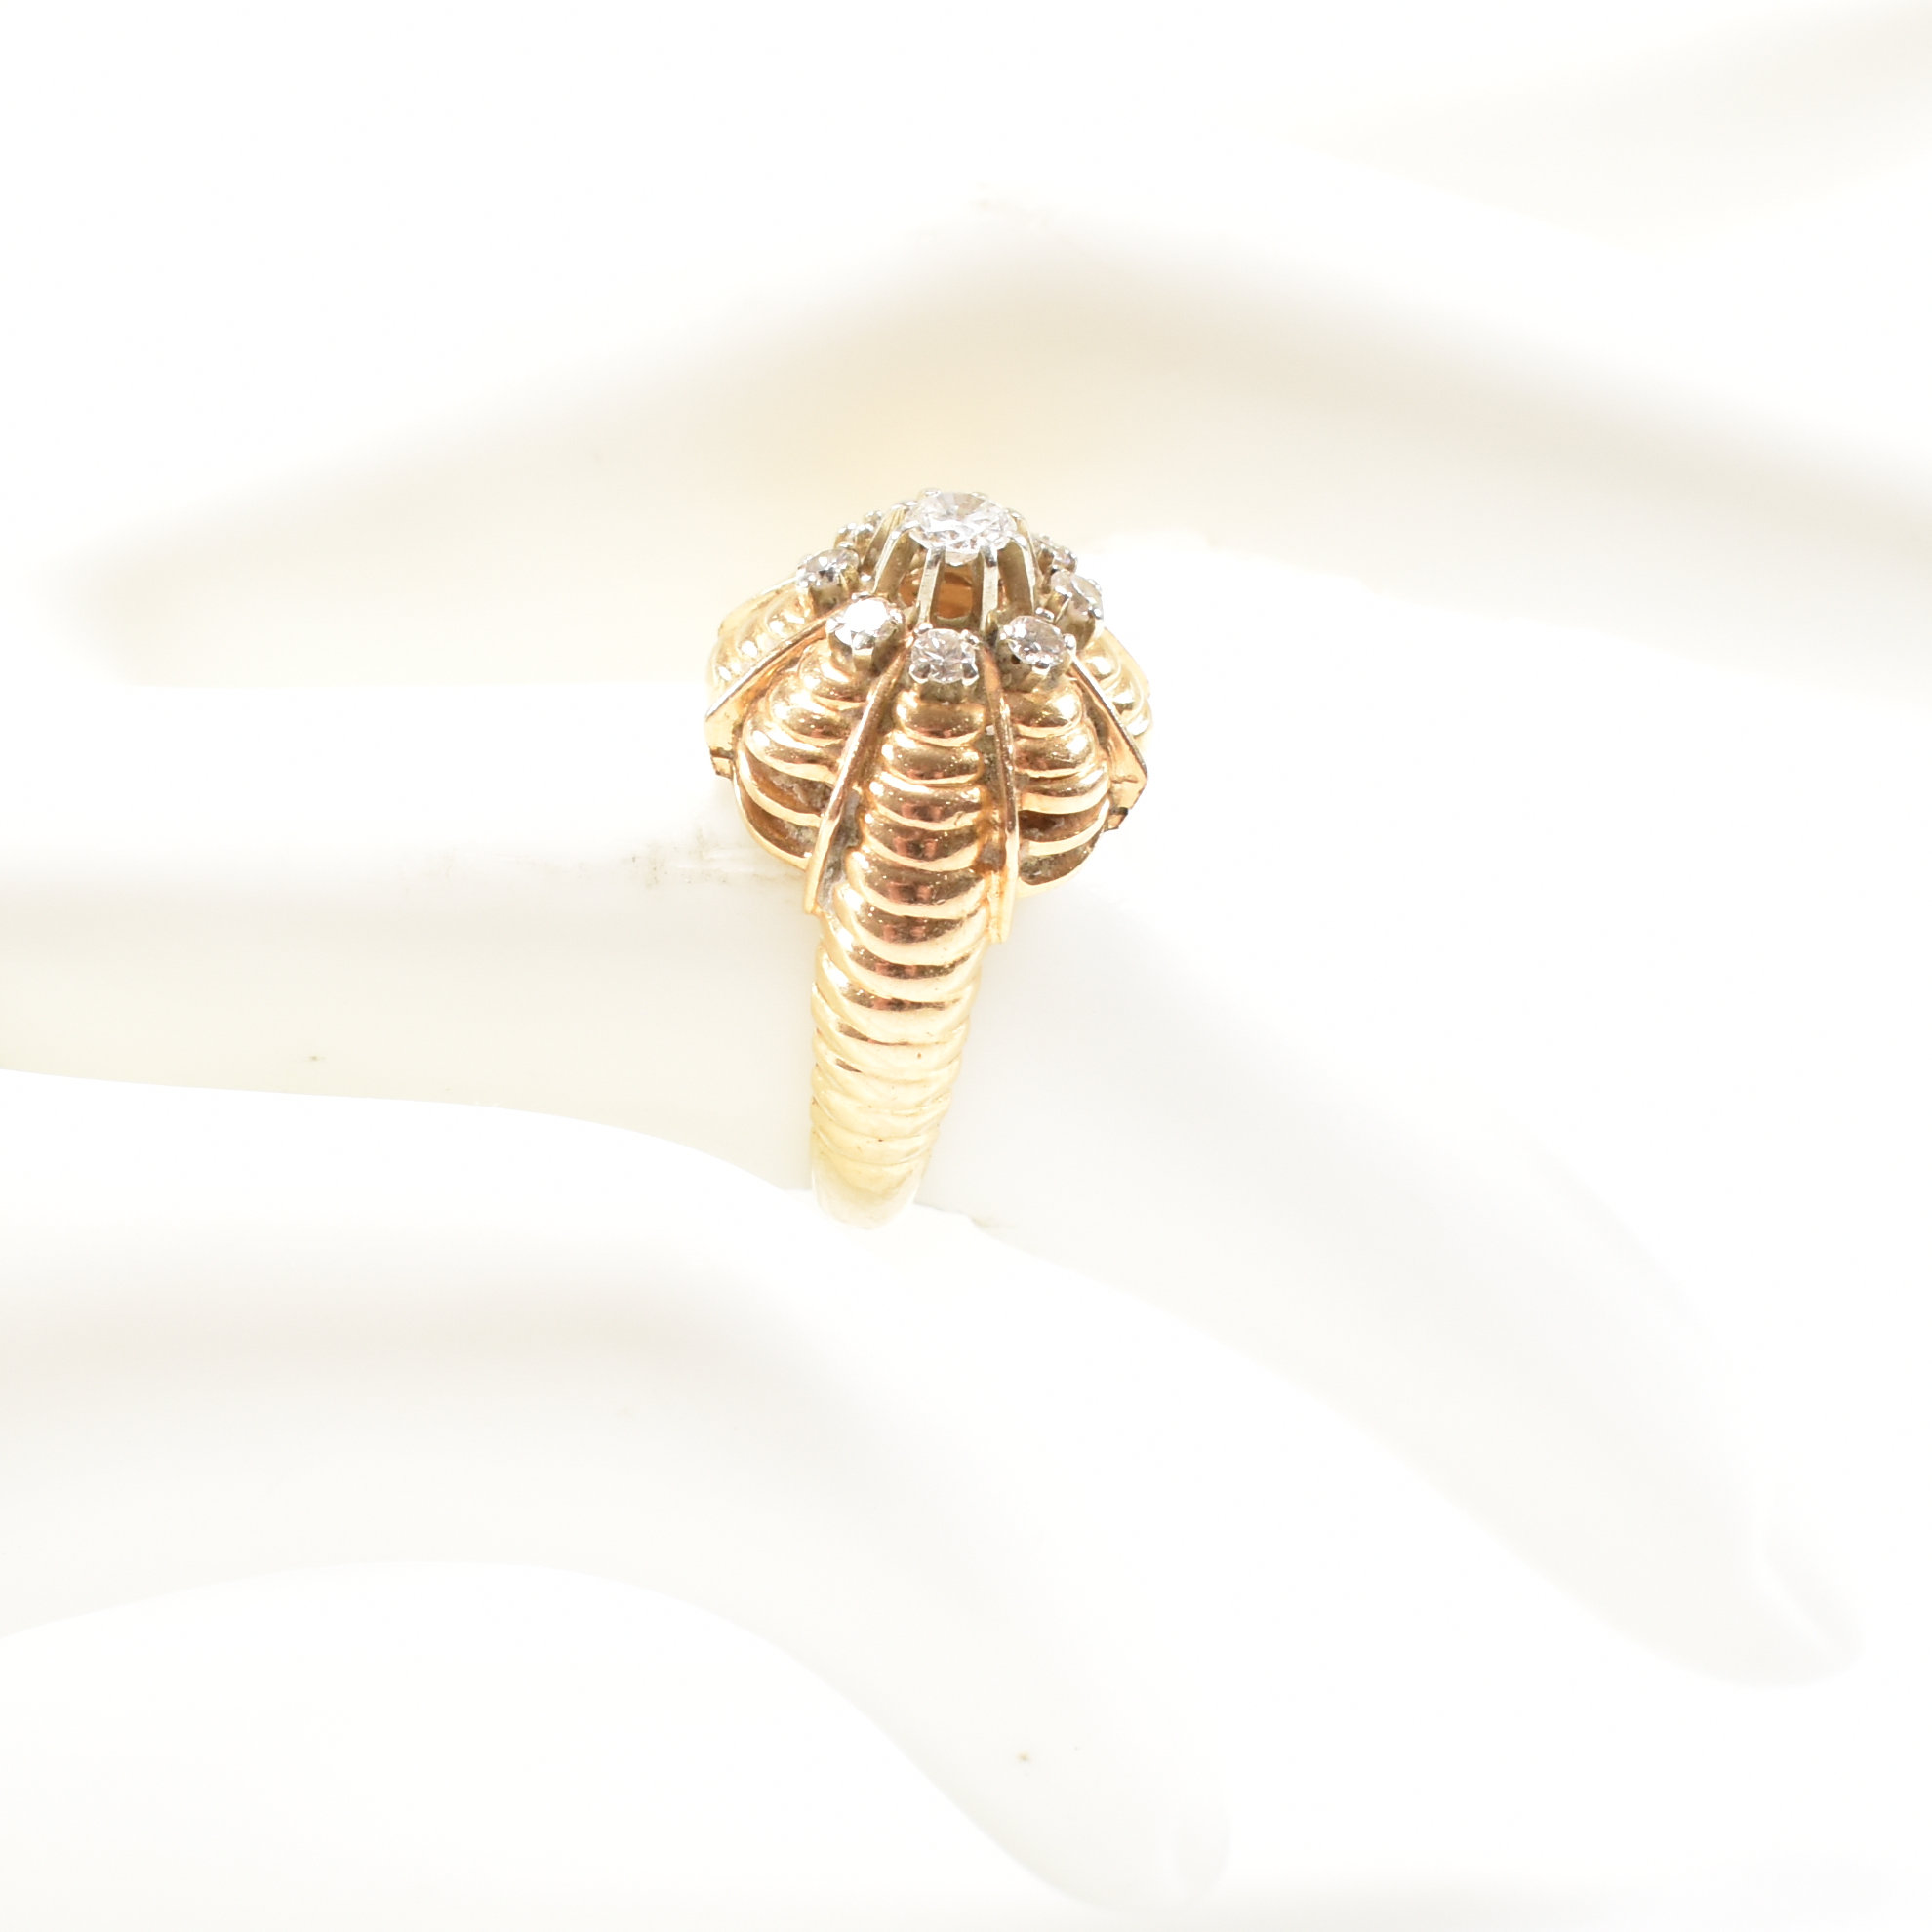 VINTAGE FRENCH DIAMOND CLUSTER RING - Image 6 of 6